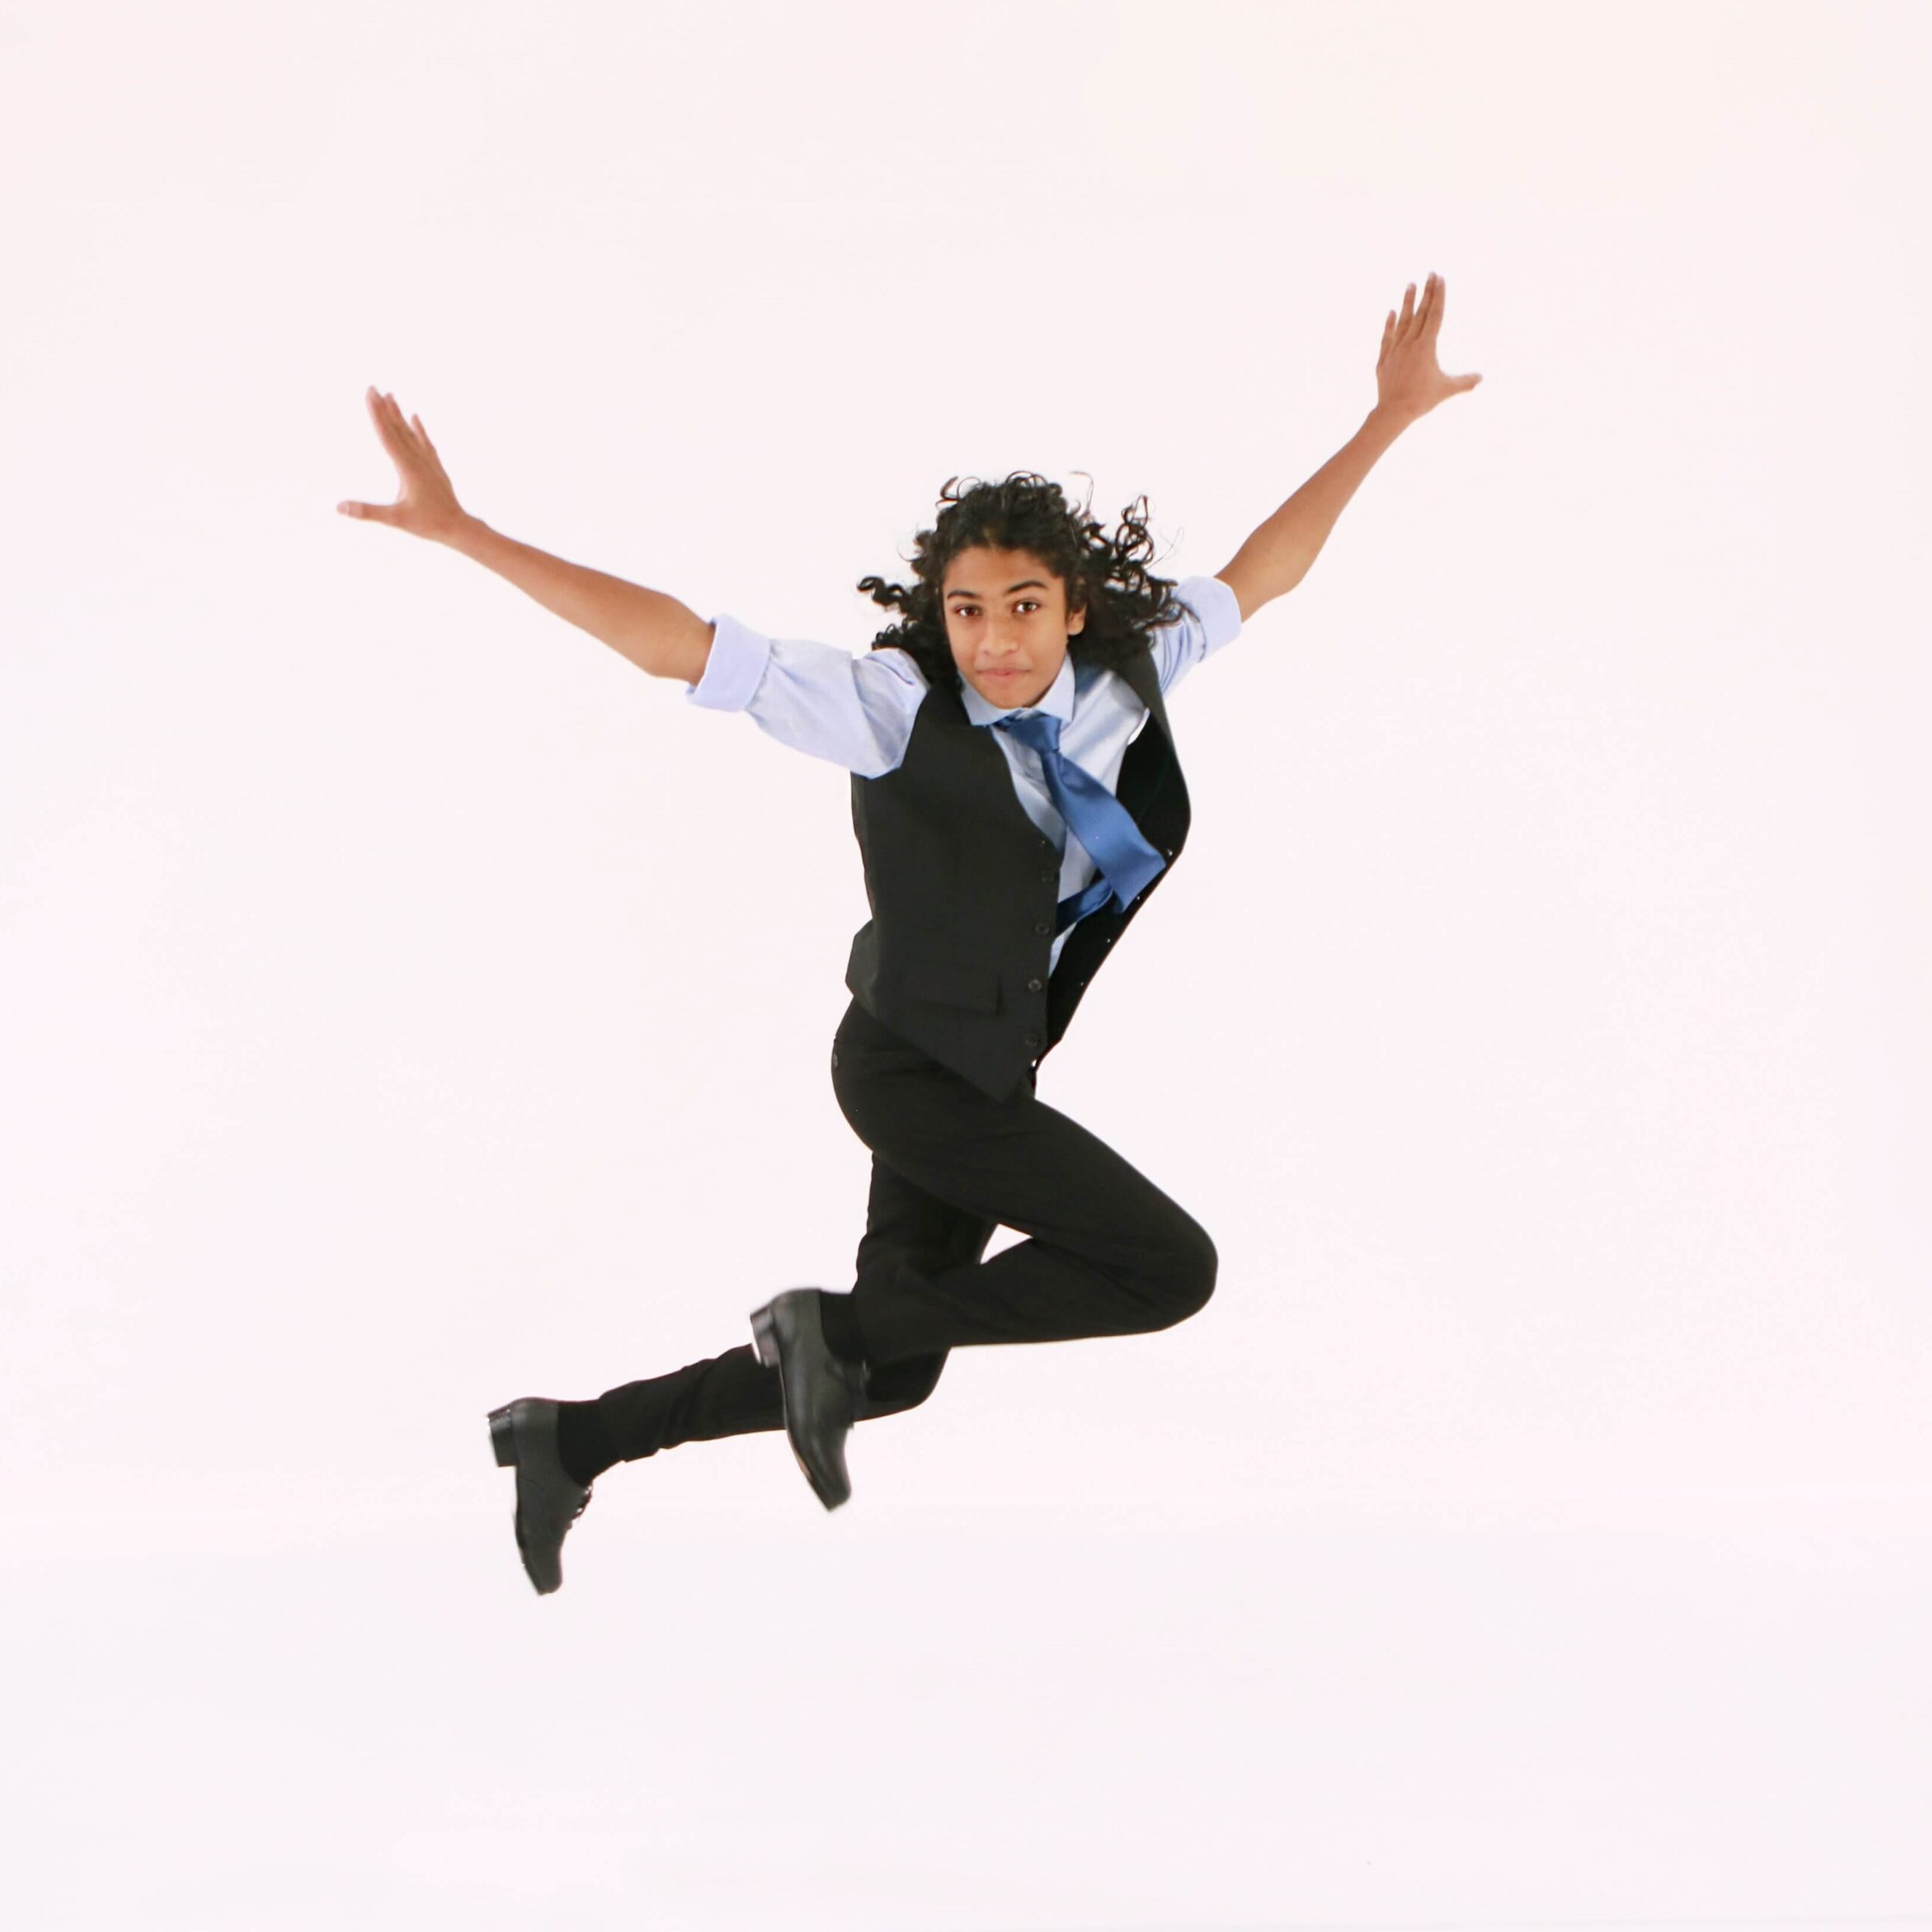 Male teenage tap dancer from The Dance Shoppe dance studio in Milton wearing a suit jumping in the air